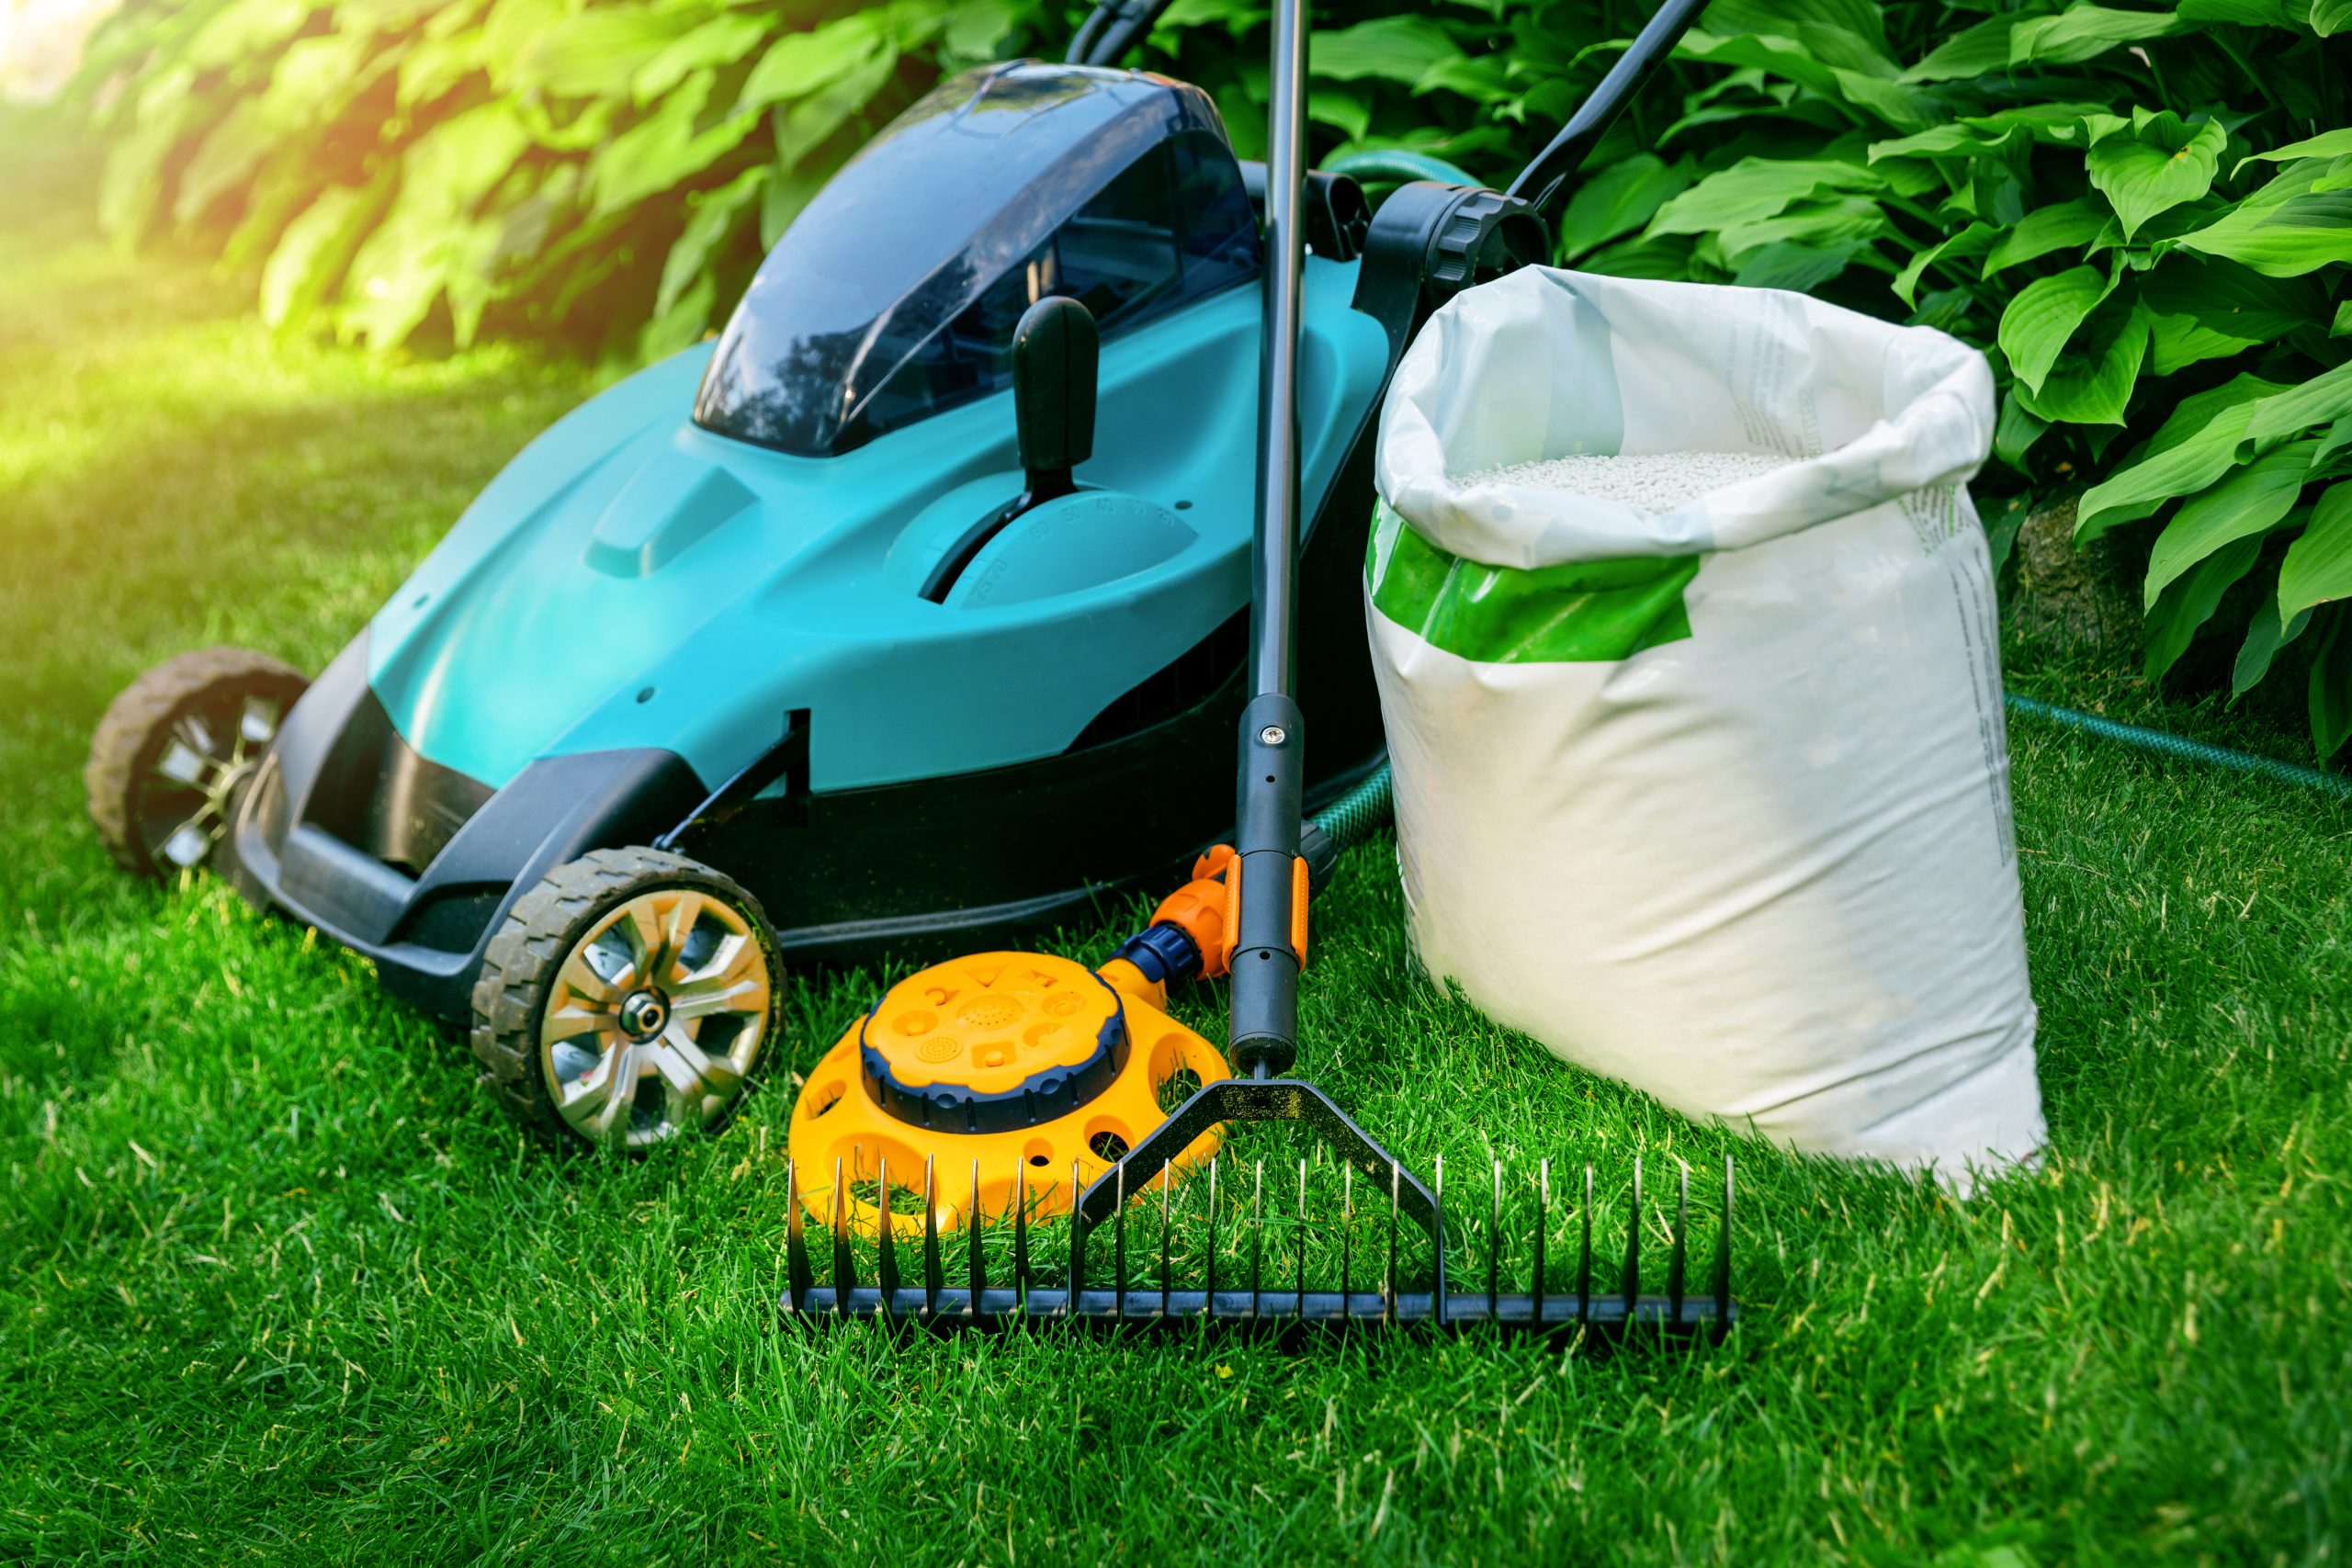 Knoxville and Maryville lawn care services